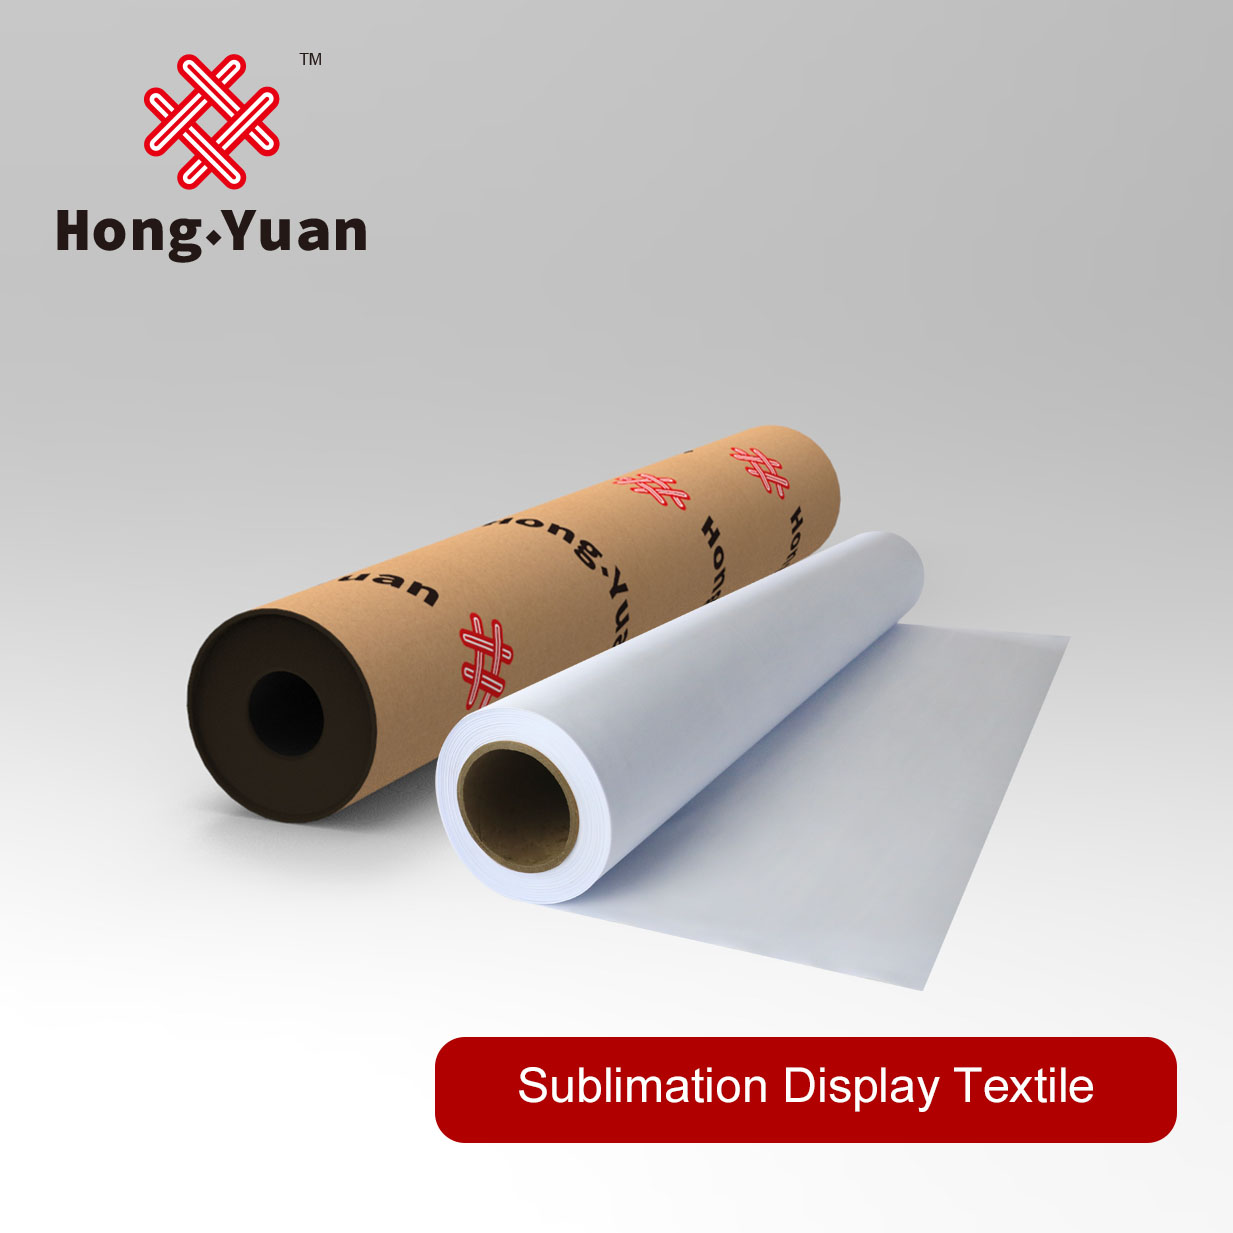 Sublimation Display Textile SDT201